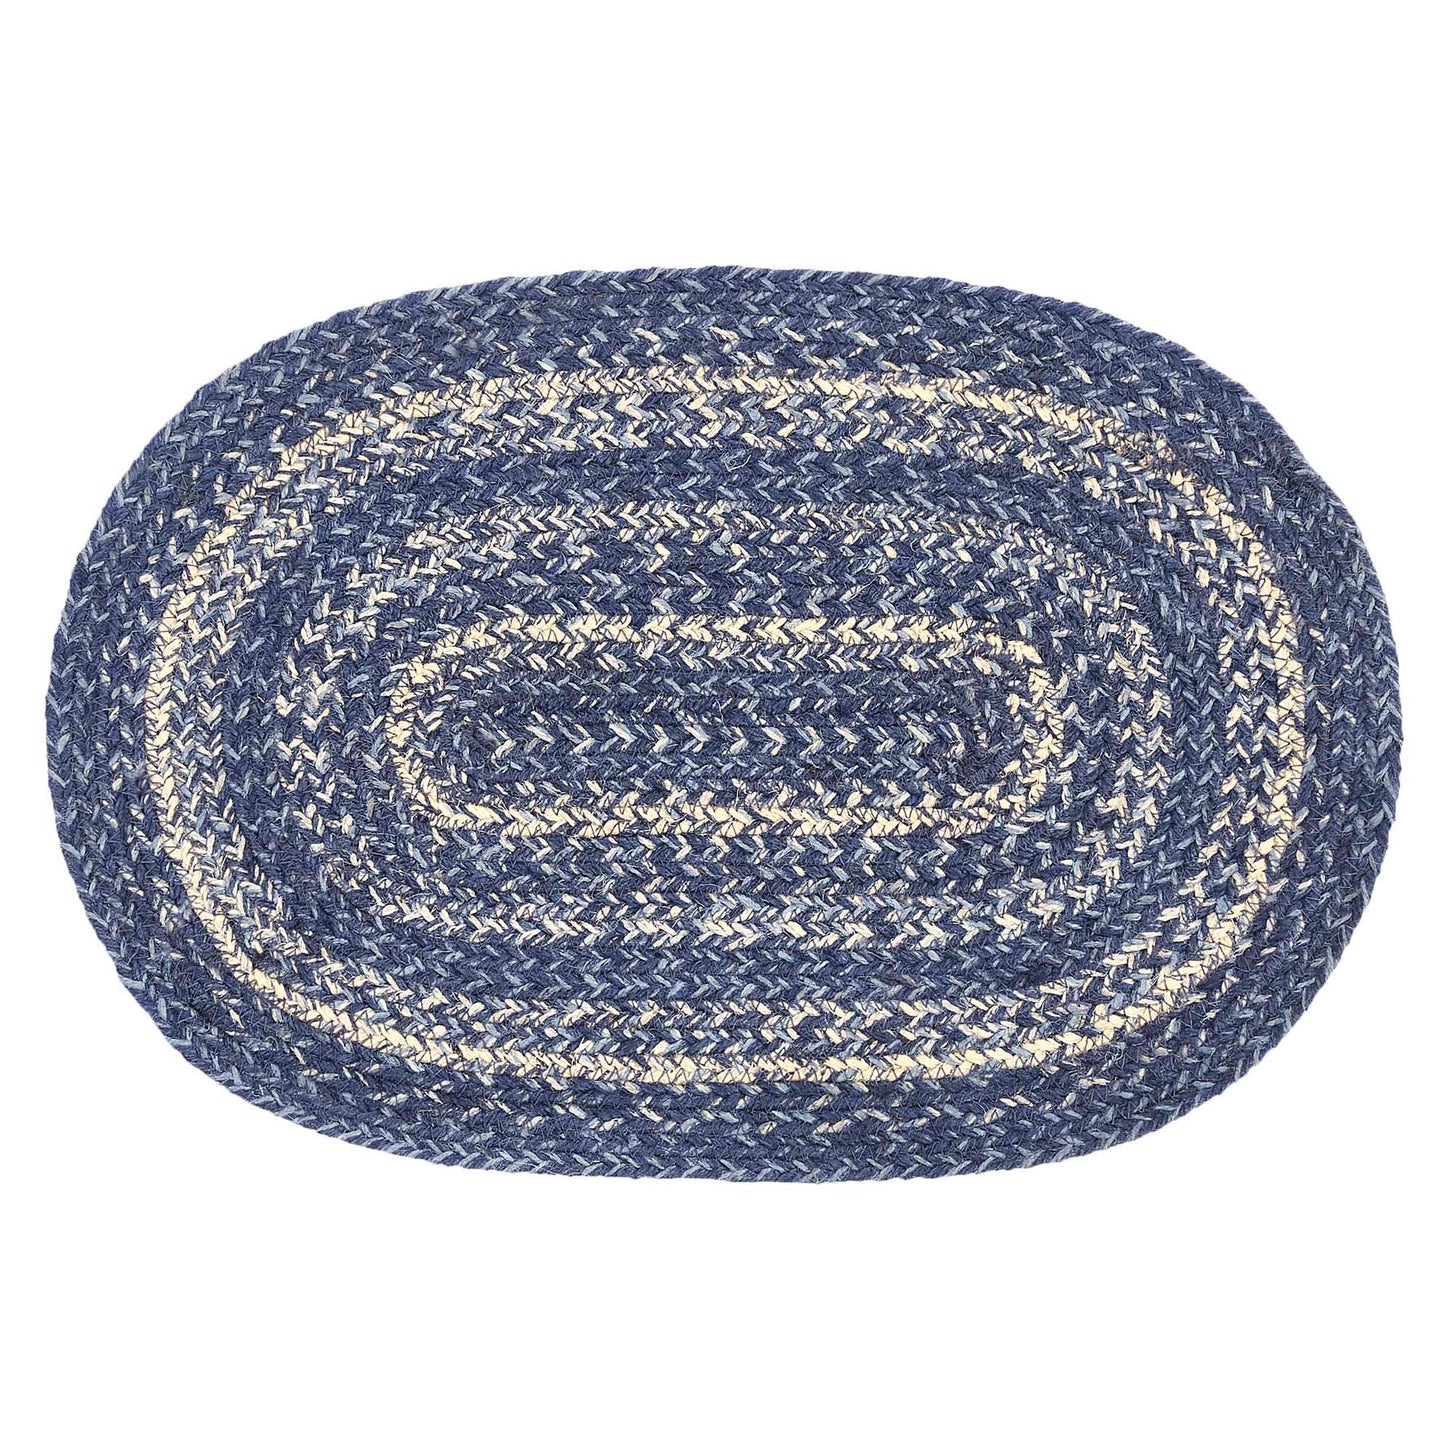 67098-Great-Falls-Blue-Jute-Oval-Placemat-12x18-image-1